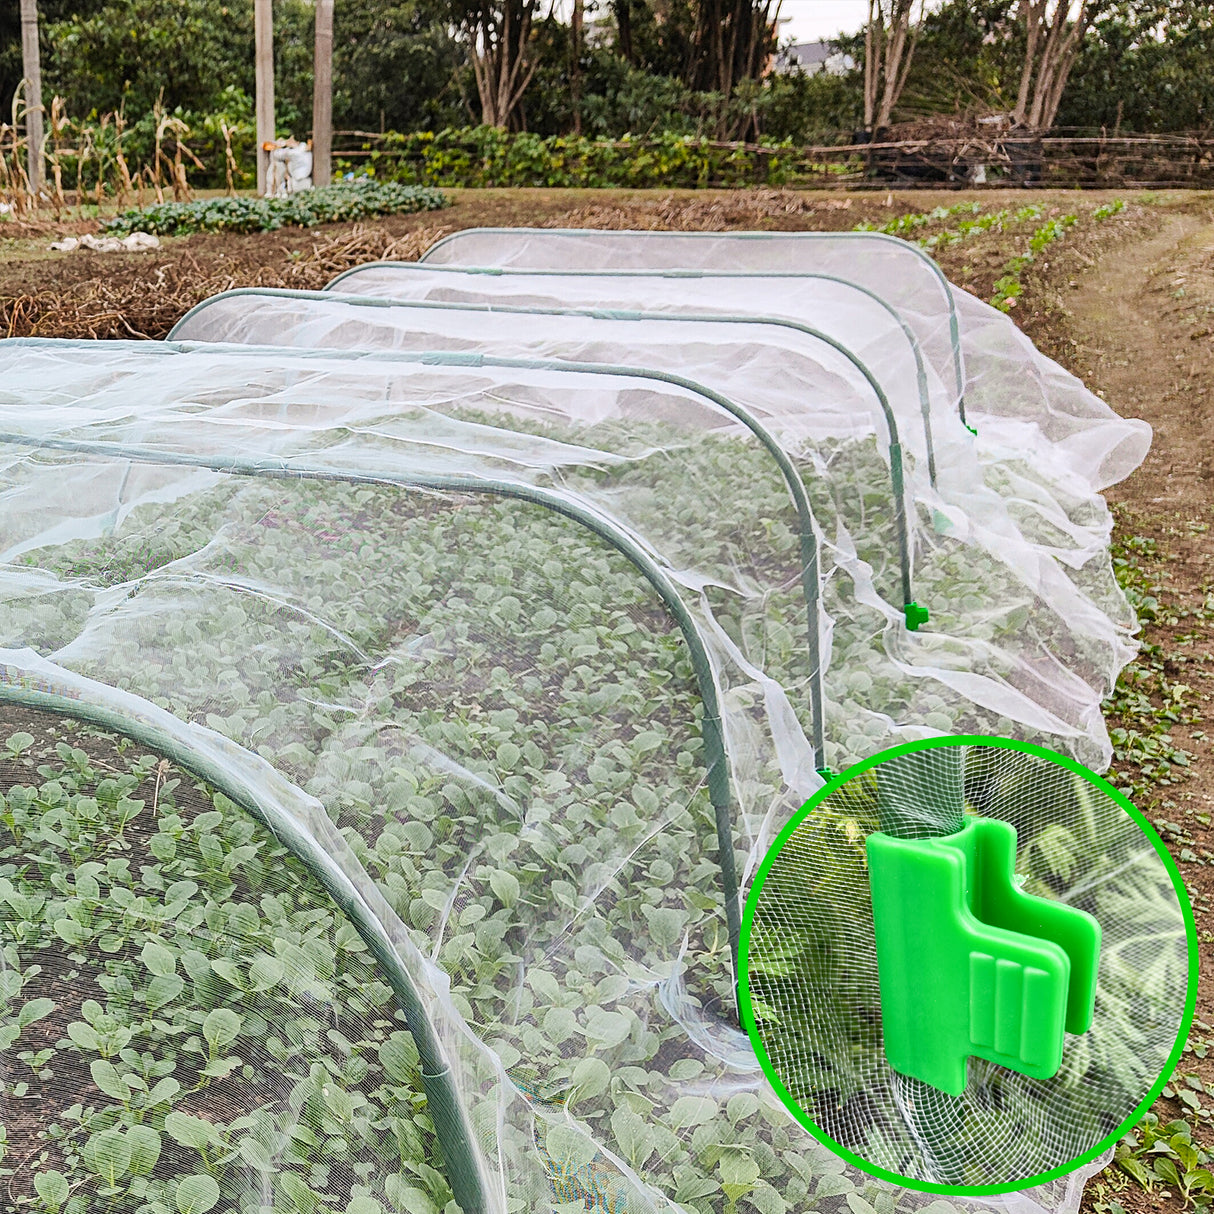 Garden Netting Kit with 8 x 20 ft Mesh Plant Cover